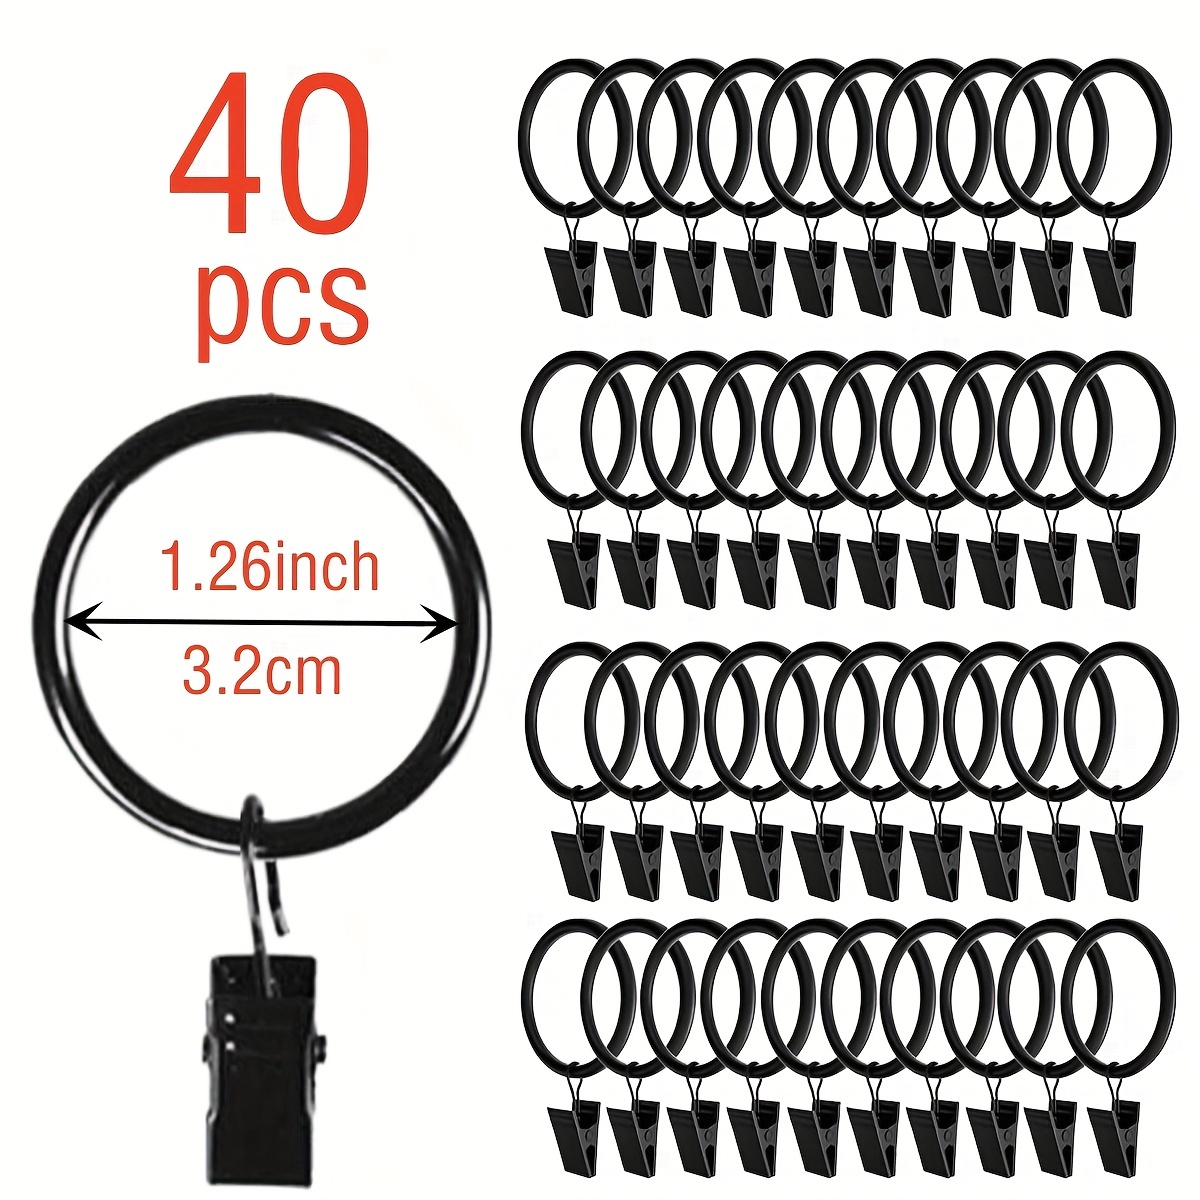  40pcs Curtain Rings with Clips Hooks 1.5 inch Rustproof Matte  Metal Stainless Steel Drapery Rings for Tension Rod Bracket Eyelets  Decorative Hangers, Vintage Black (1.5 Interior Diameter) : Home & Kitchen